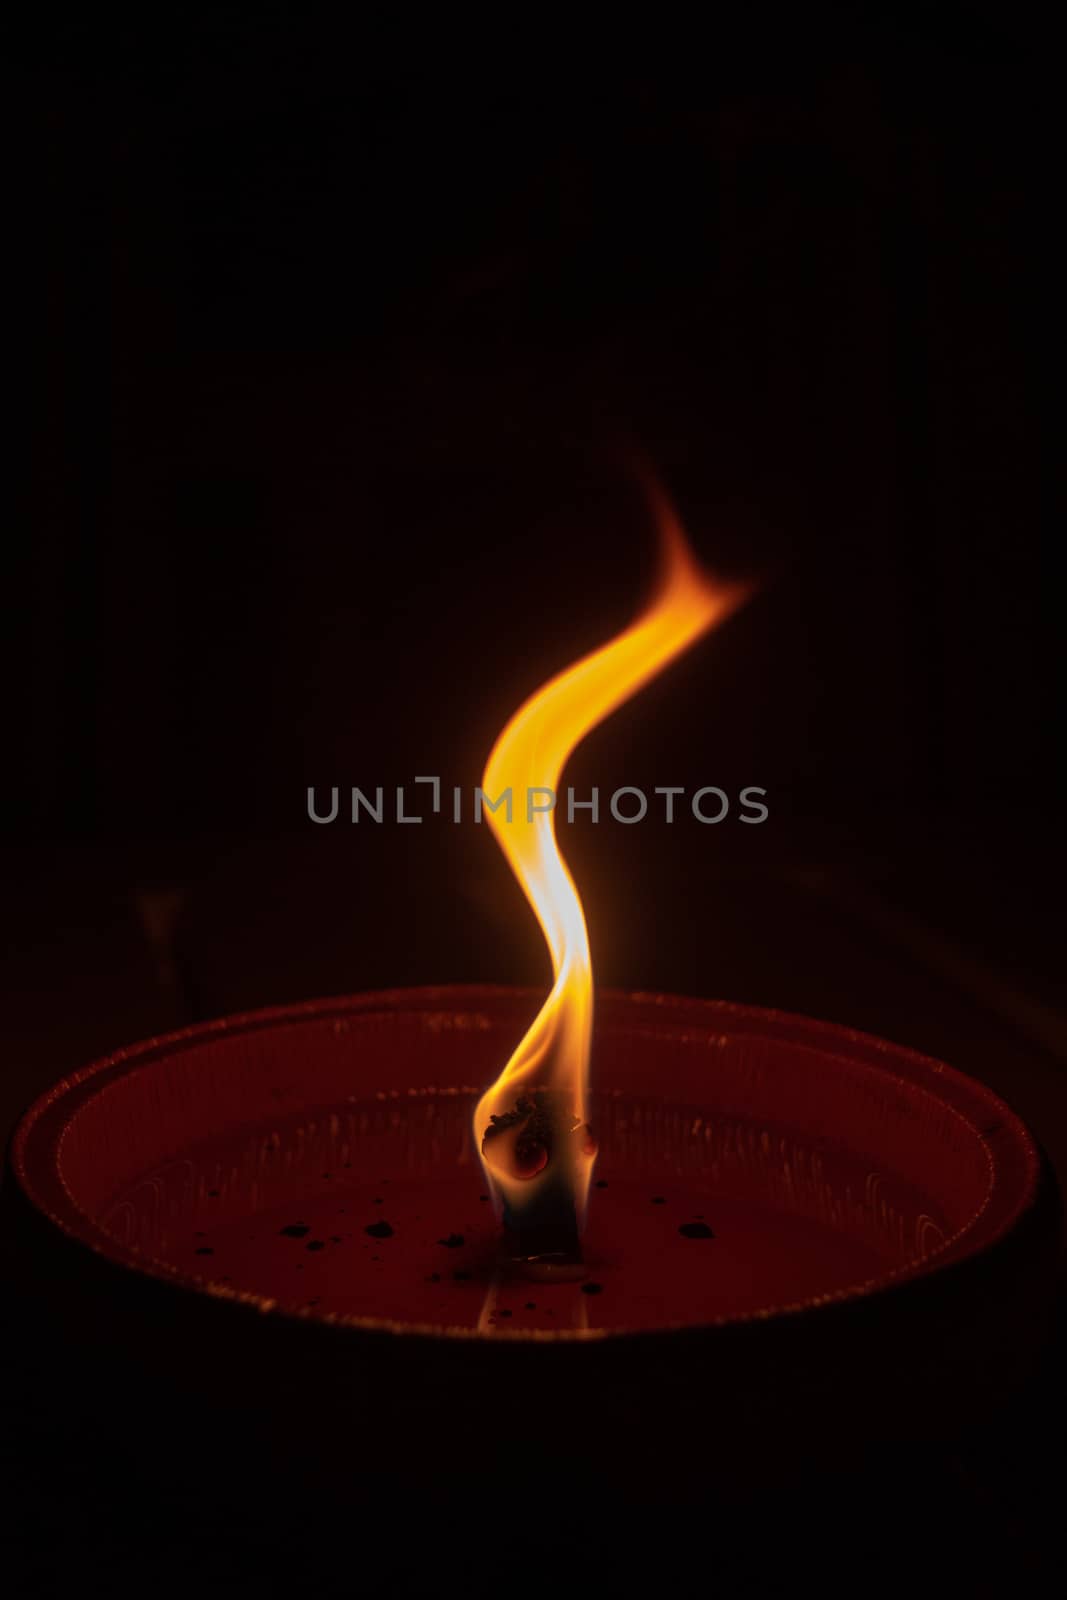 Candle flame close up on dark background, interesting flame figure, candle fire shape s form